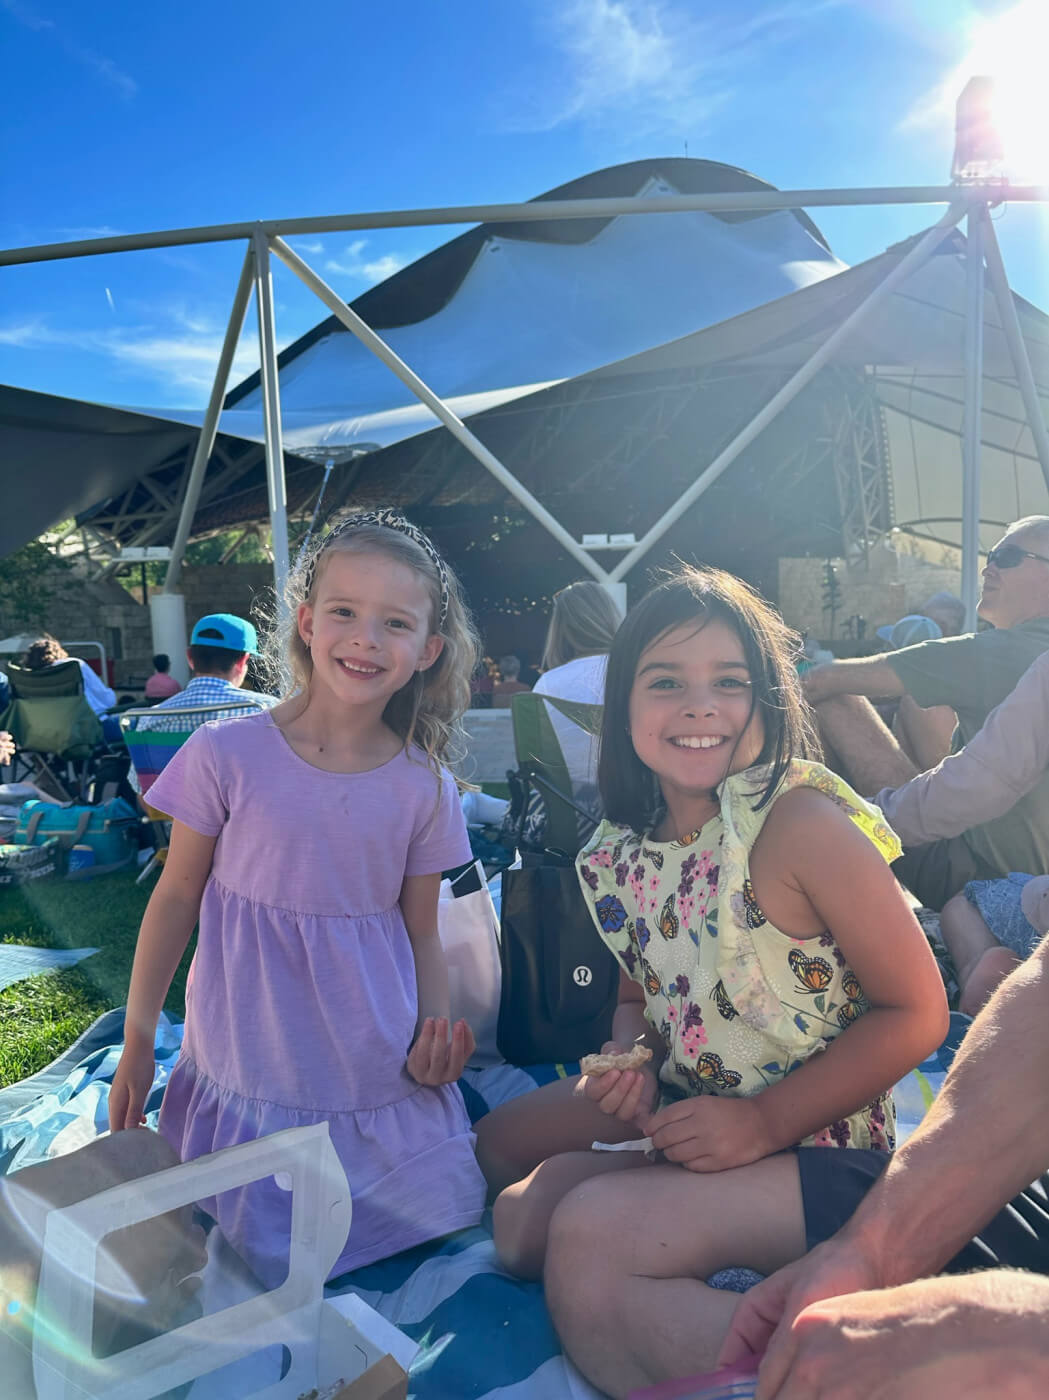 Sun Valley Music Festival - The Best of Sun Valley, Idaho with Kids